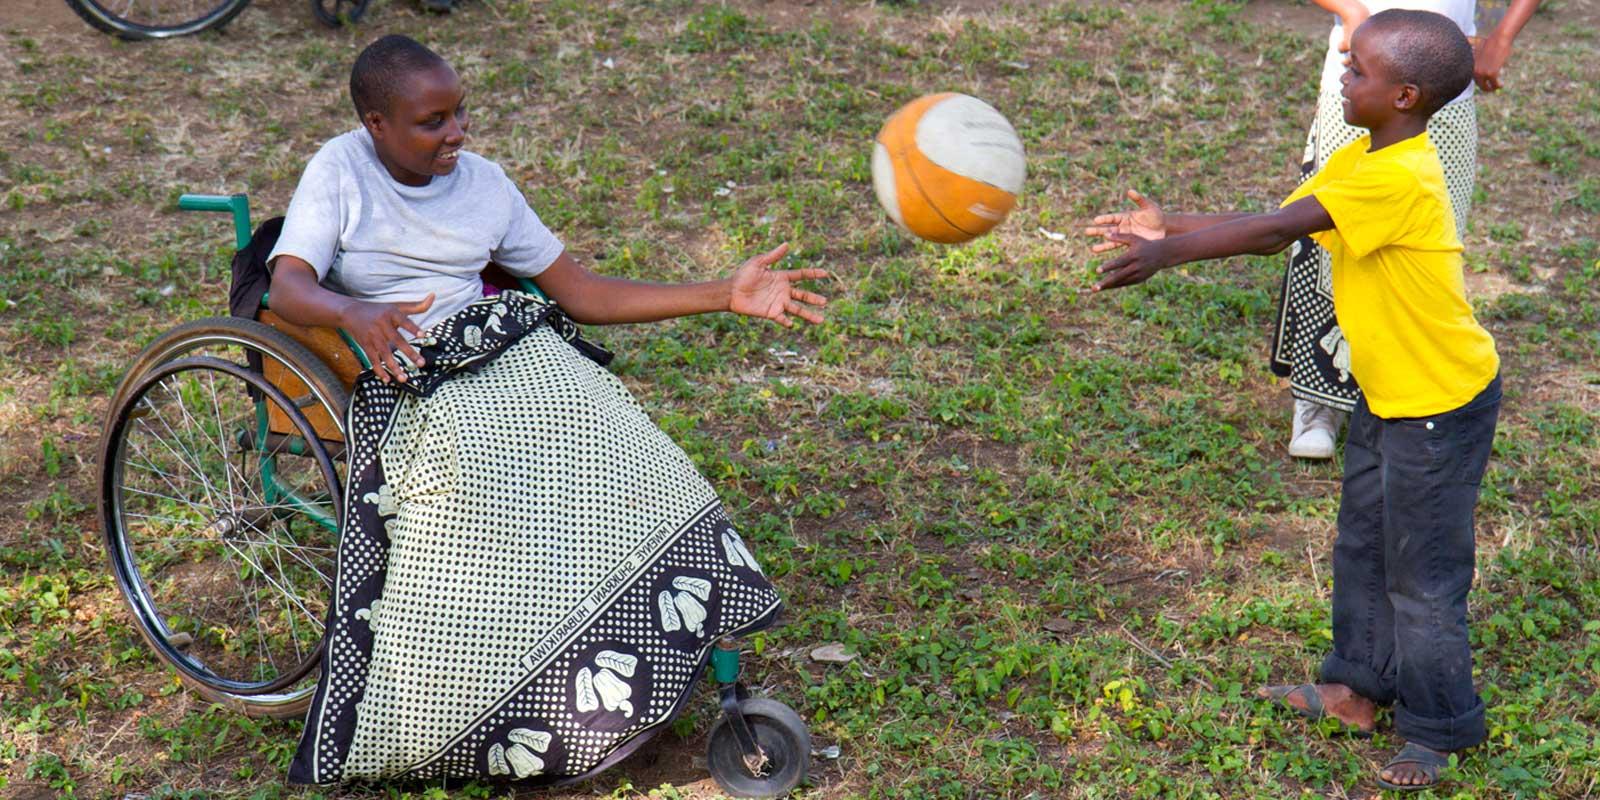 Girl in wheelchair playing ball with young boy